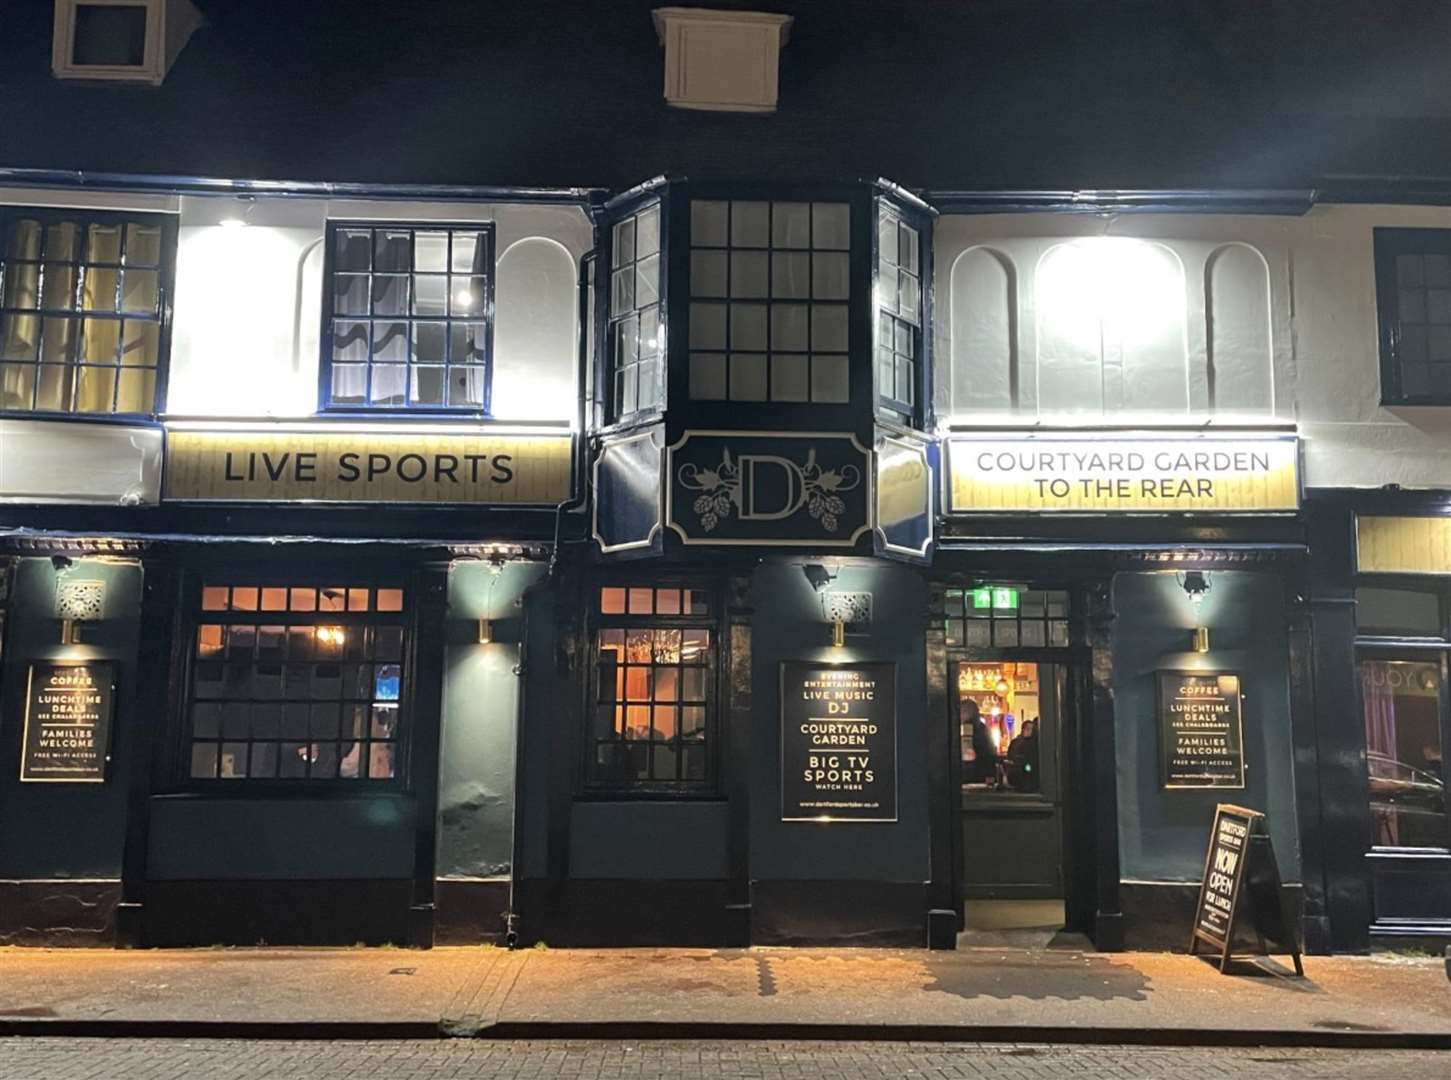 The Dartford Sports Bar opened in March in place of the former Industry nightclub in Spital Street following a £400,000 refurbishment